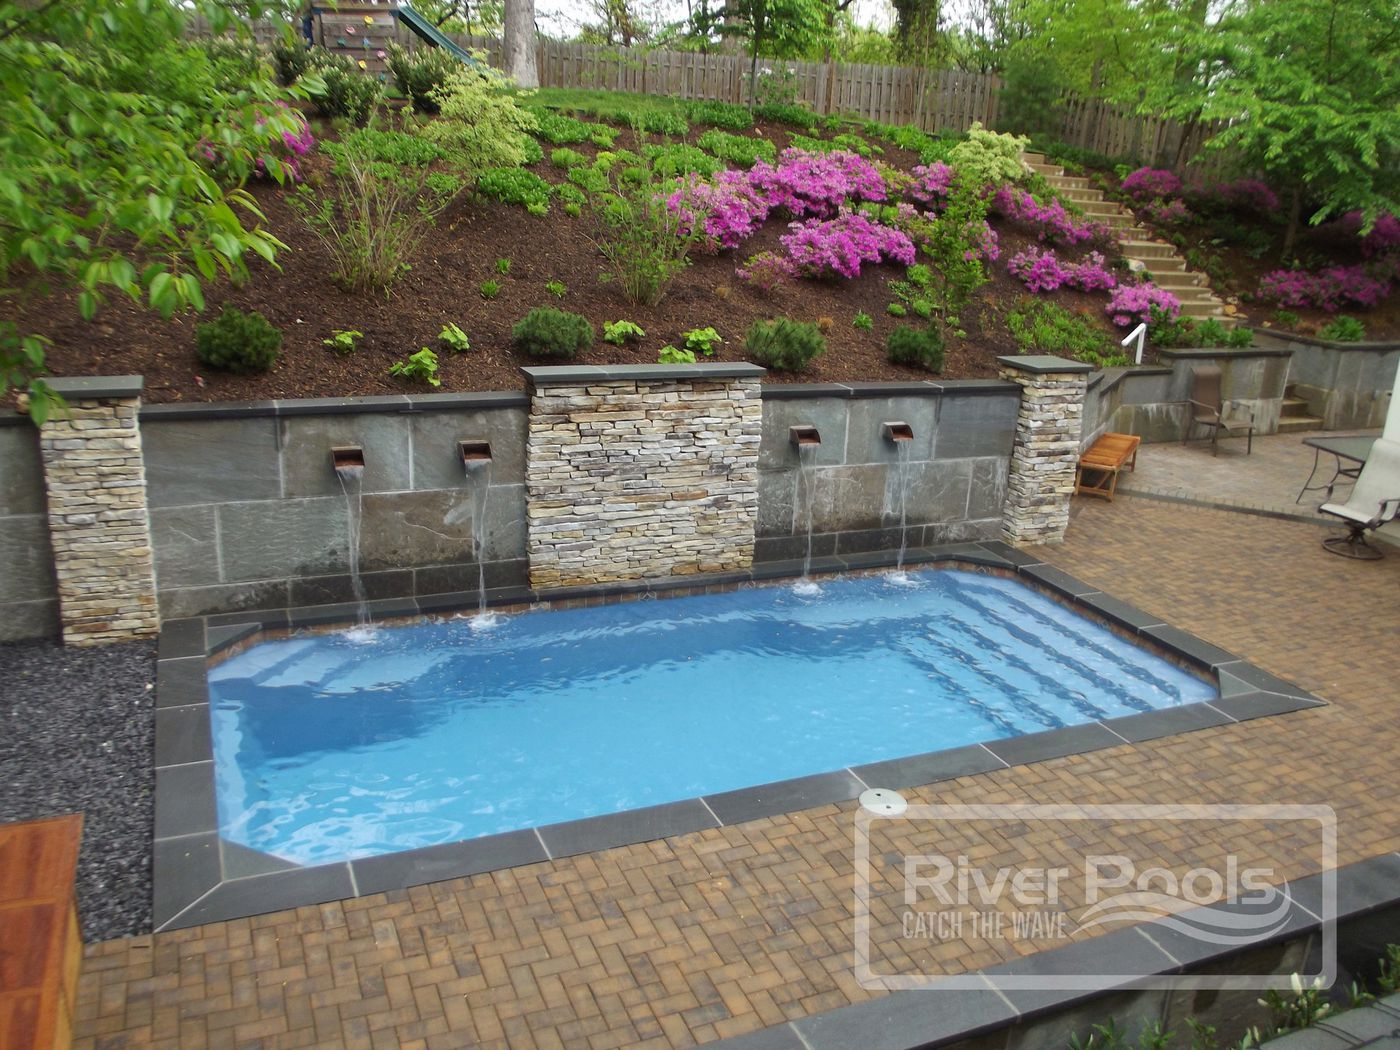 Pool Retaining Walls for Sloped Yards: Cost, Materials, and More